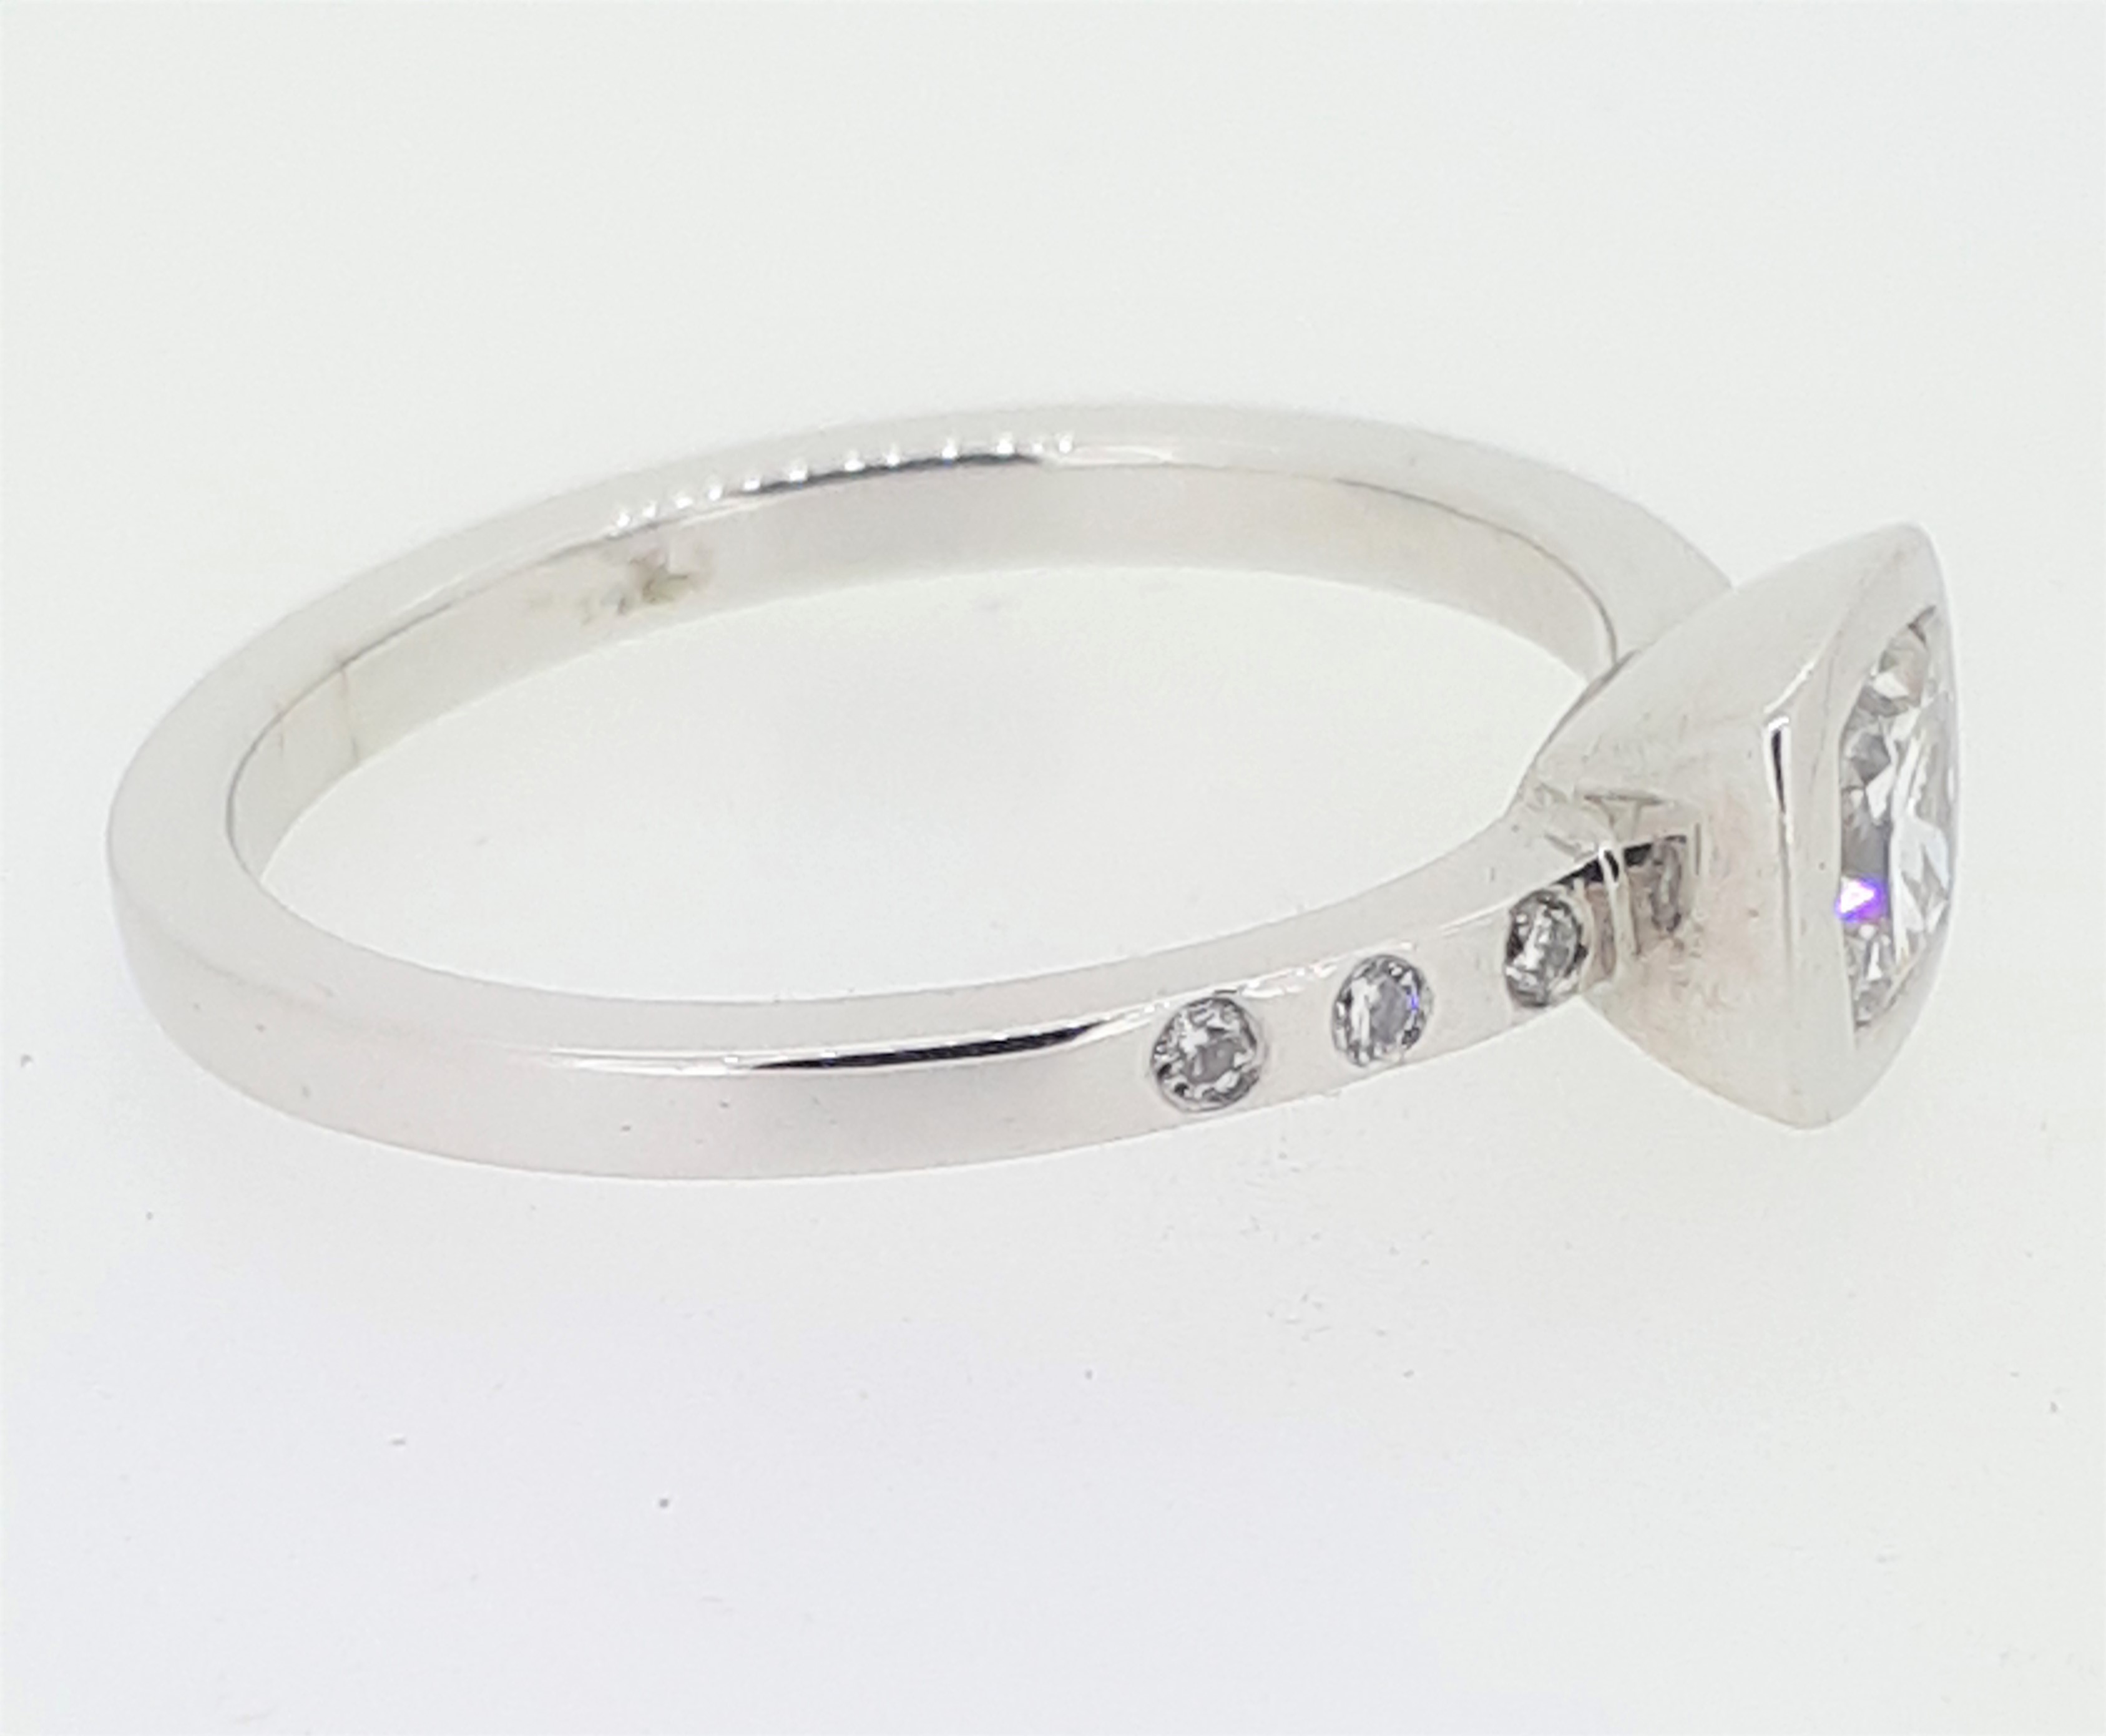 18ct White Gold (750) 0.5ct Cushion Cut Diamond Ring with Diamond Shoulders - Image 4 of 7